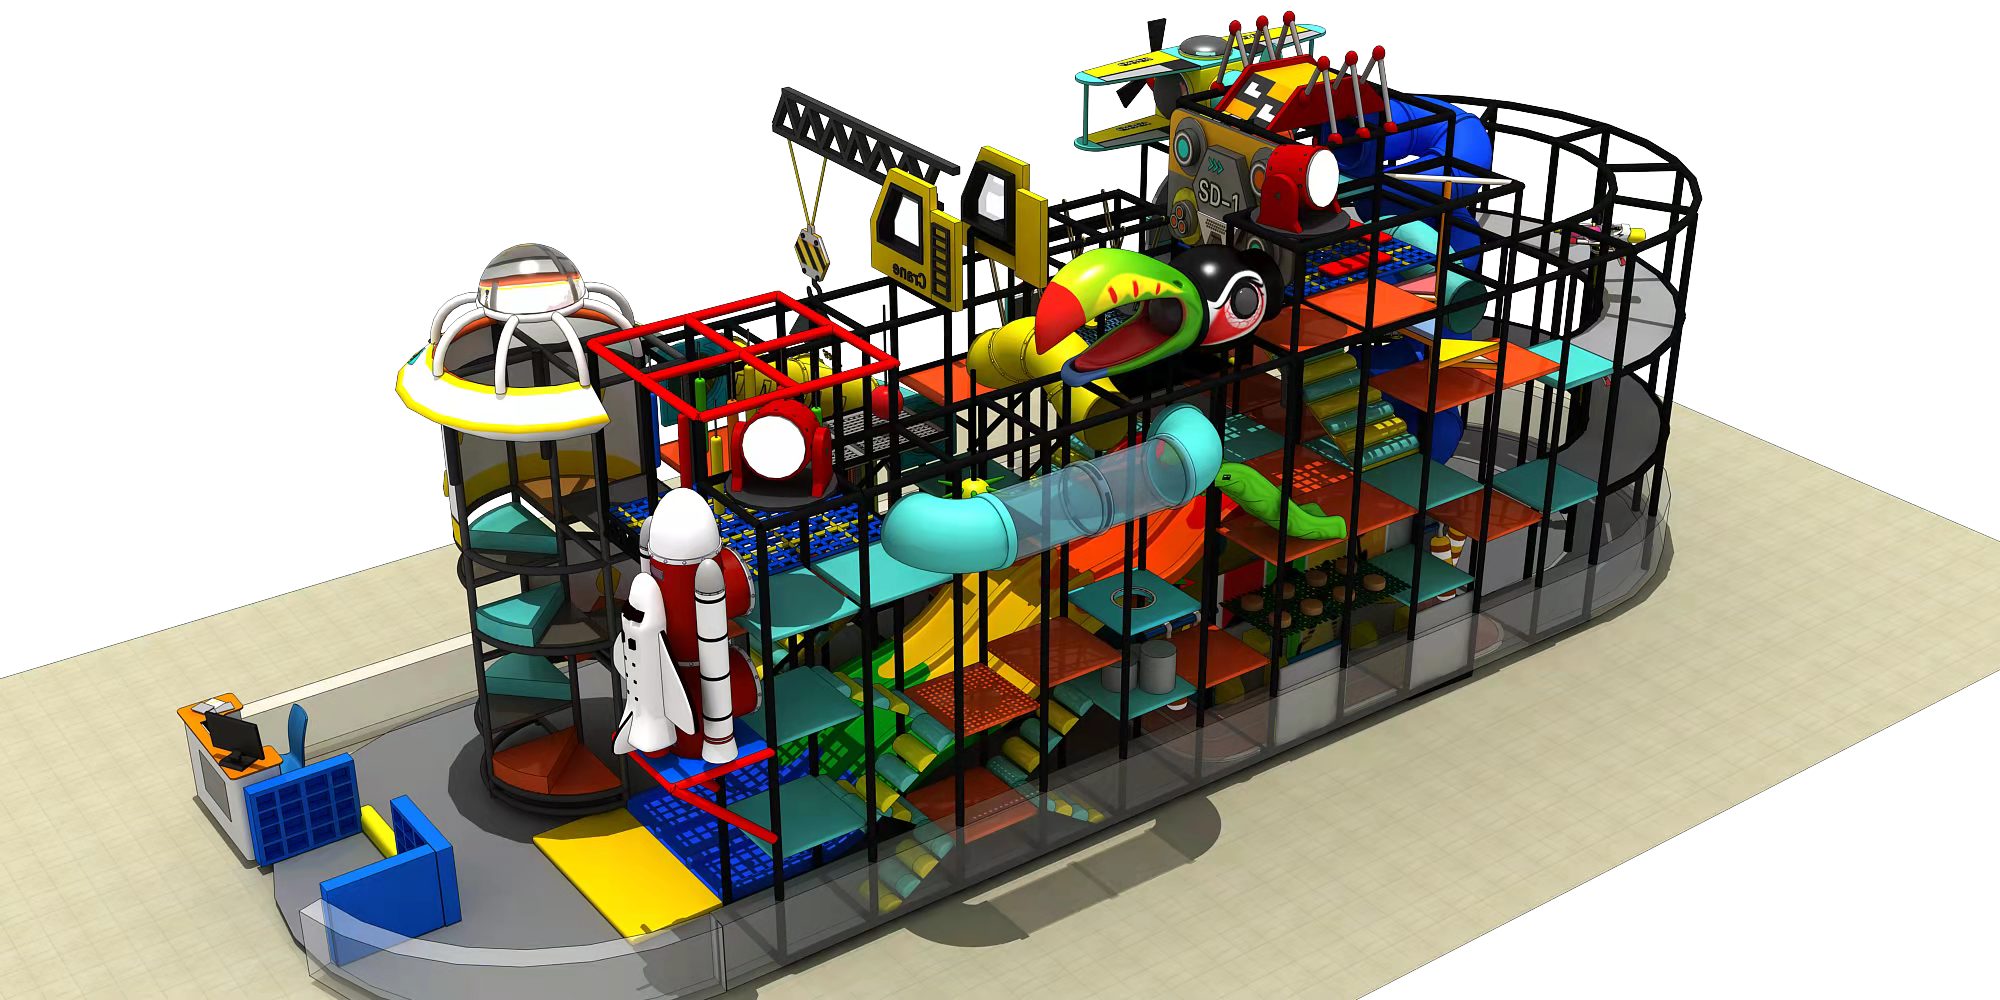 Playground Indoor Commercial Playsets For Any type of Kids Indoor Playground Business